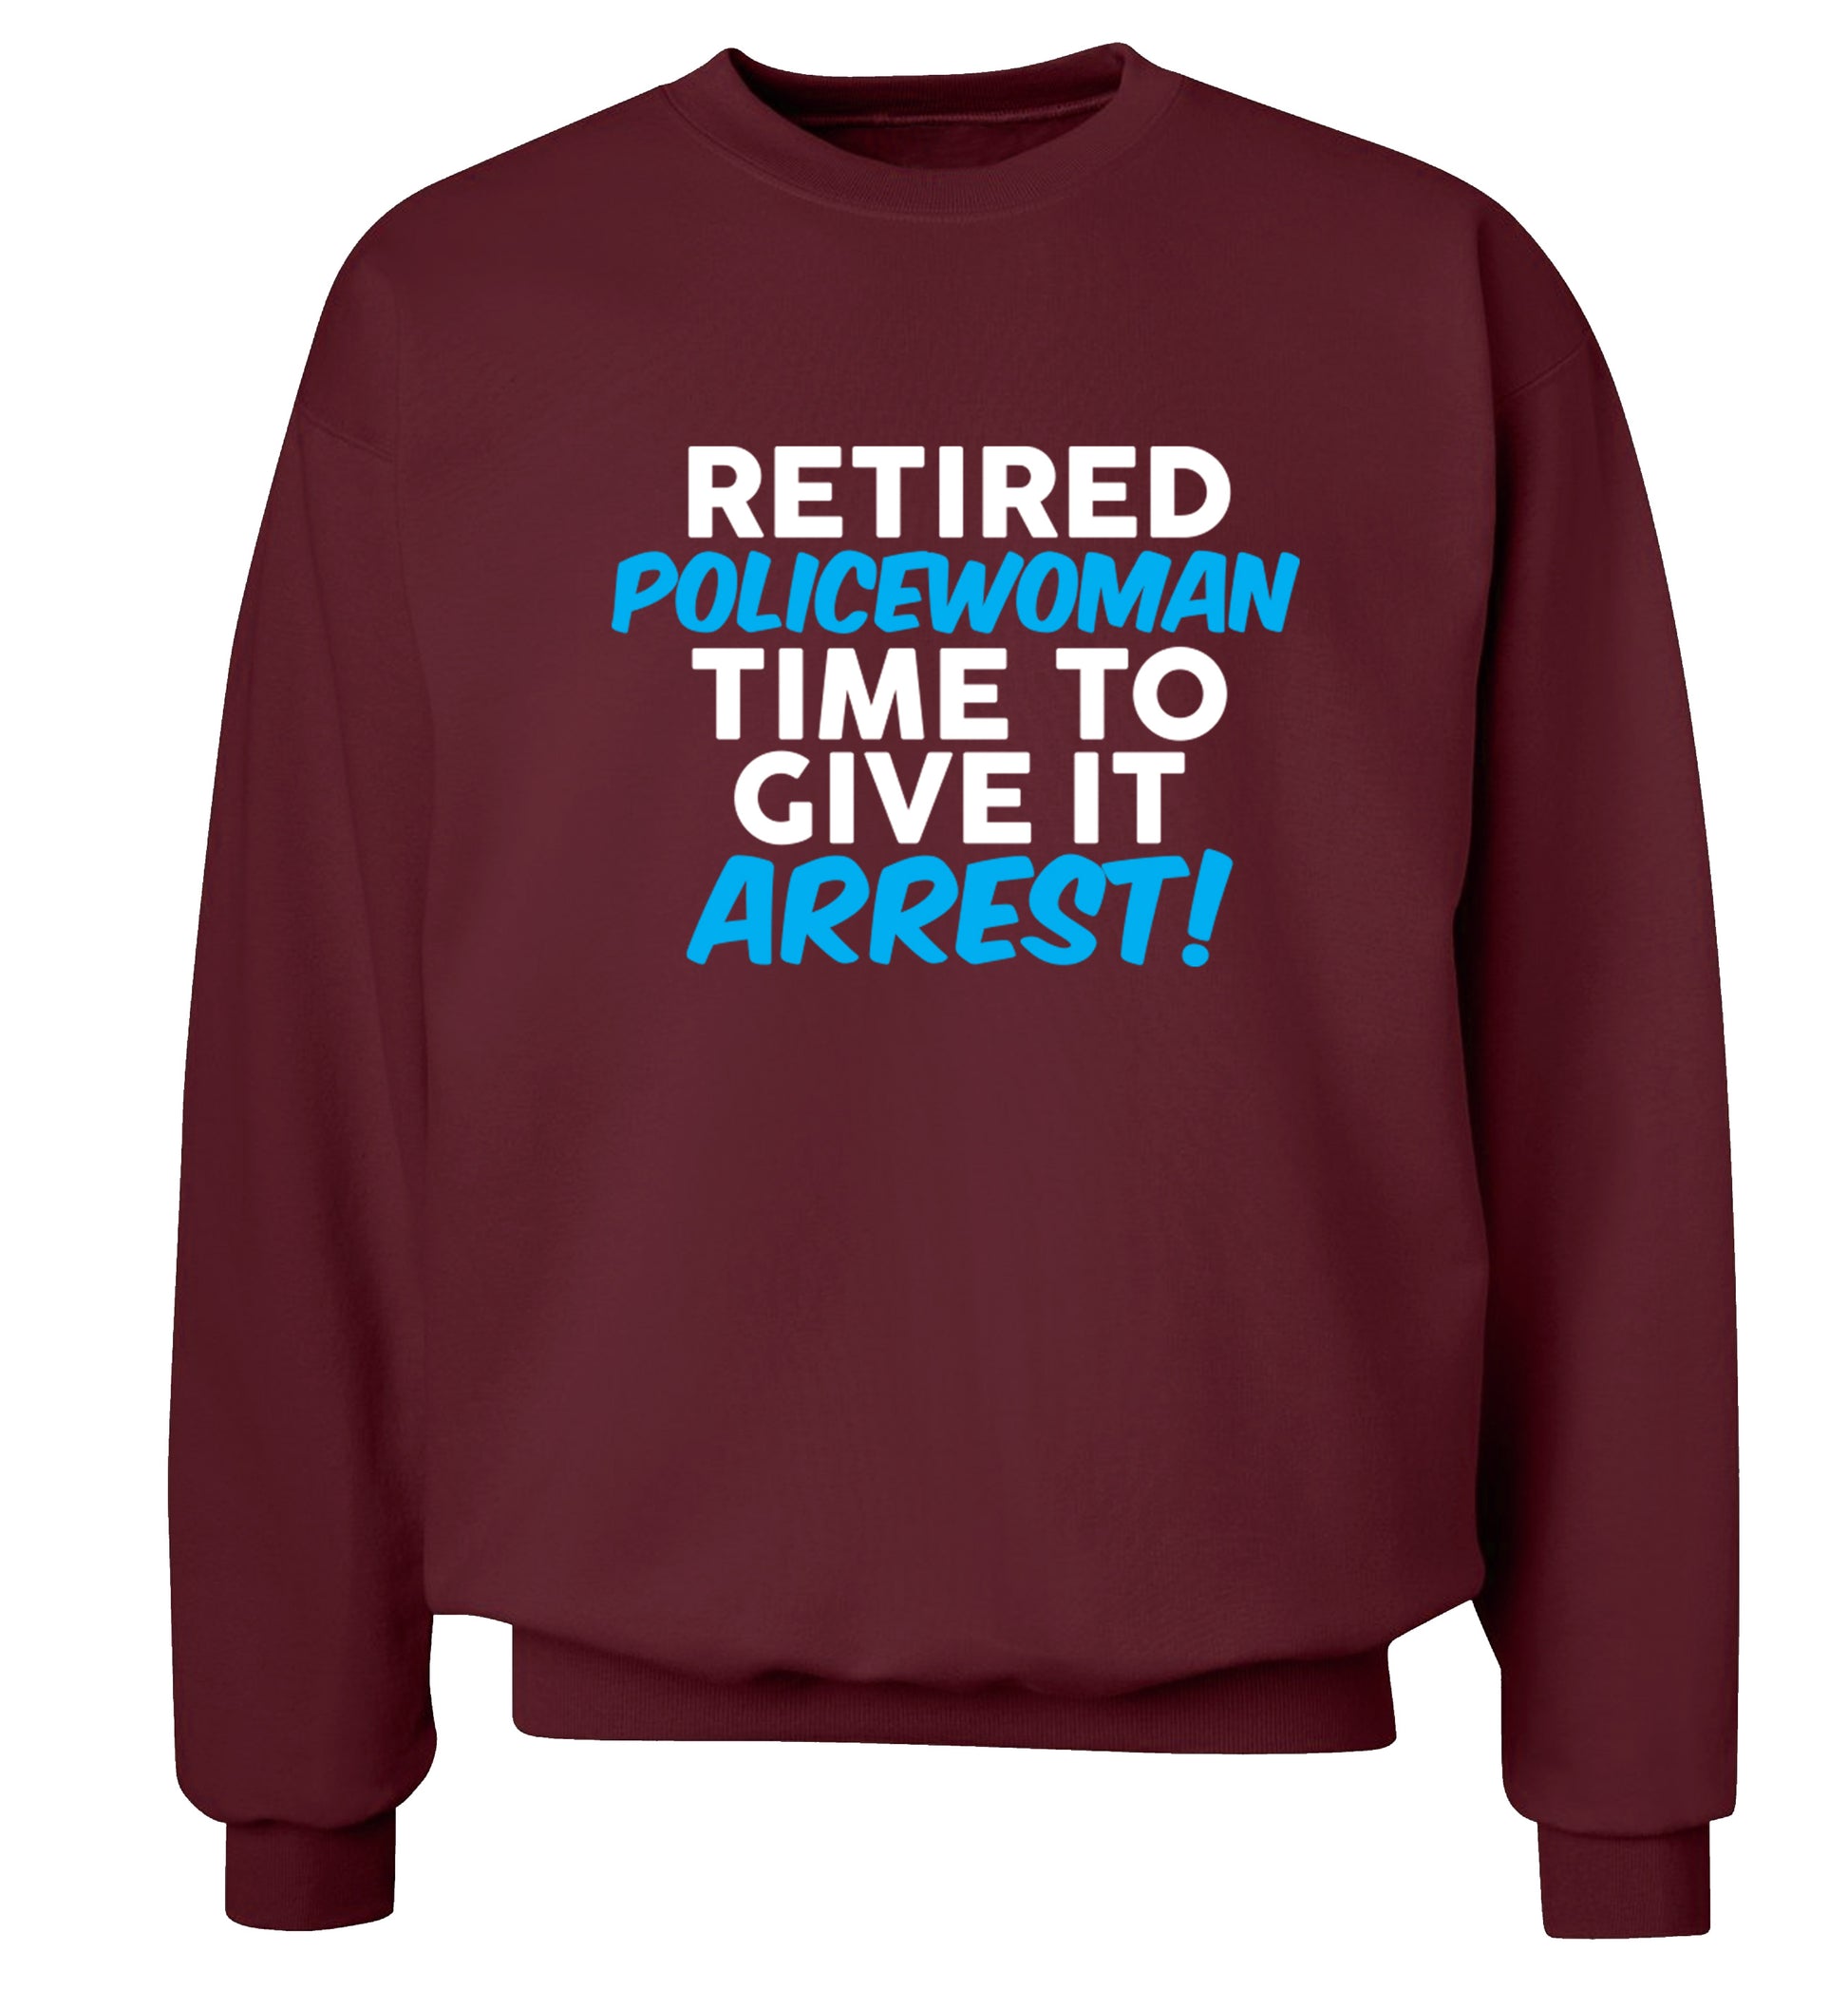 Retired policewoman time to give it arrest Adult's unisex maroon Sweater 2XL